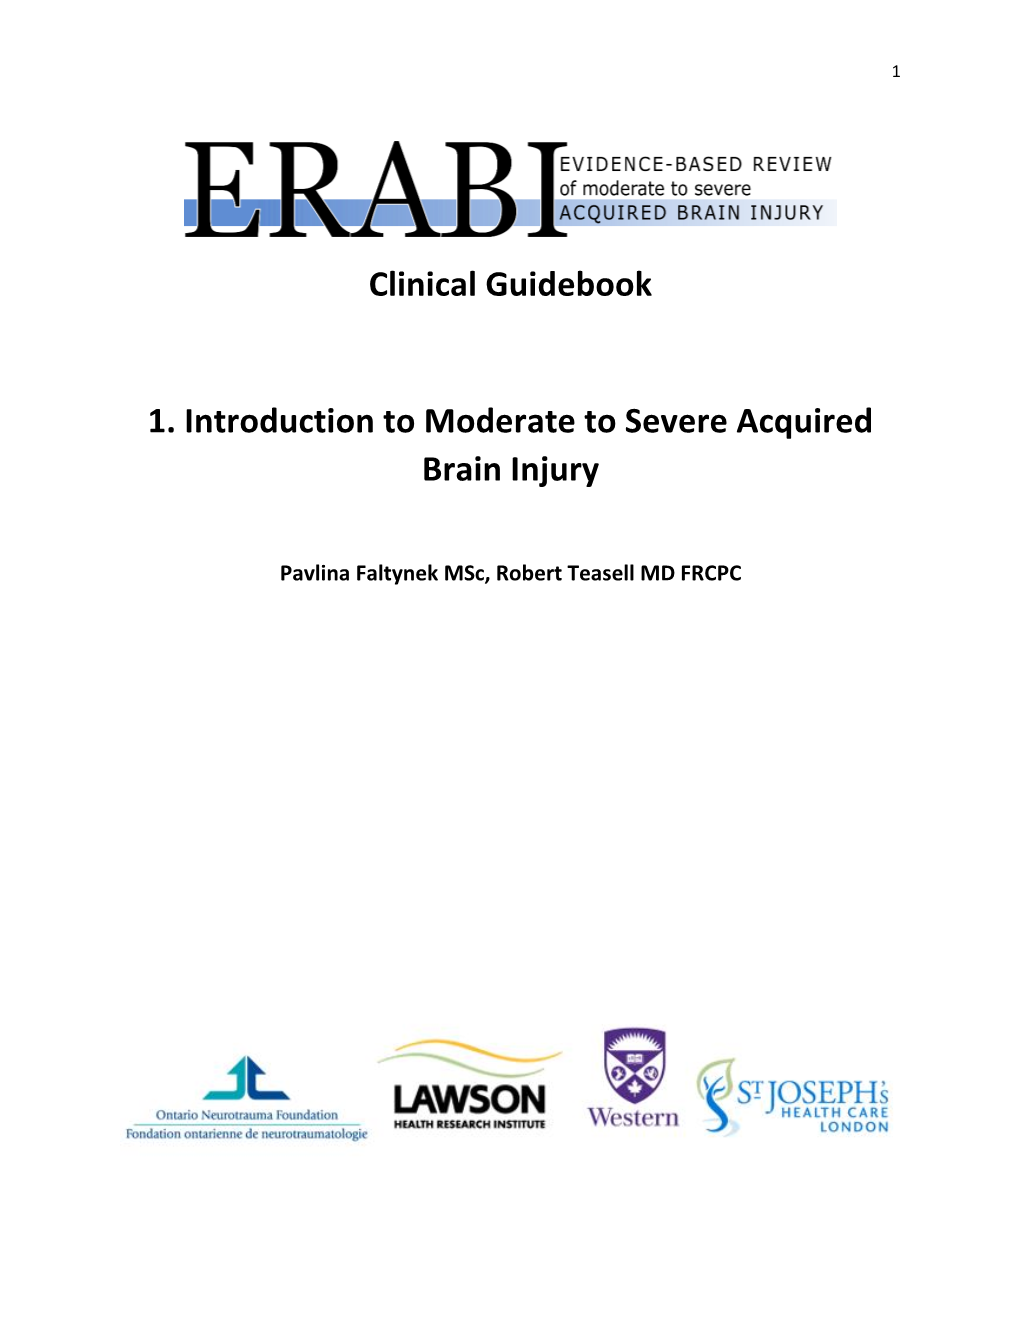 Clinical Guidebook 1. Introduction to Moderate to Severe Acquired Brain Injury